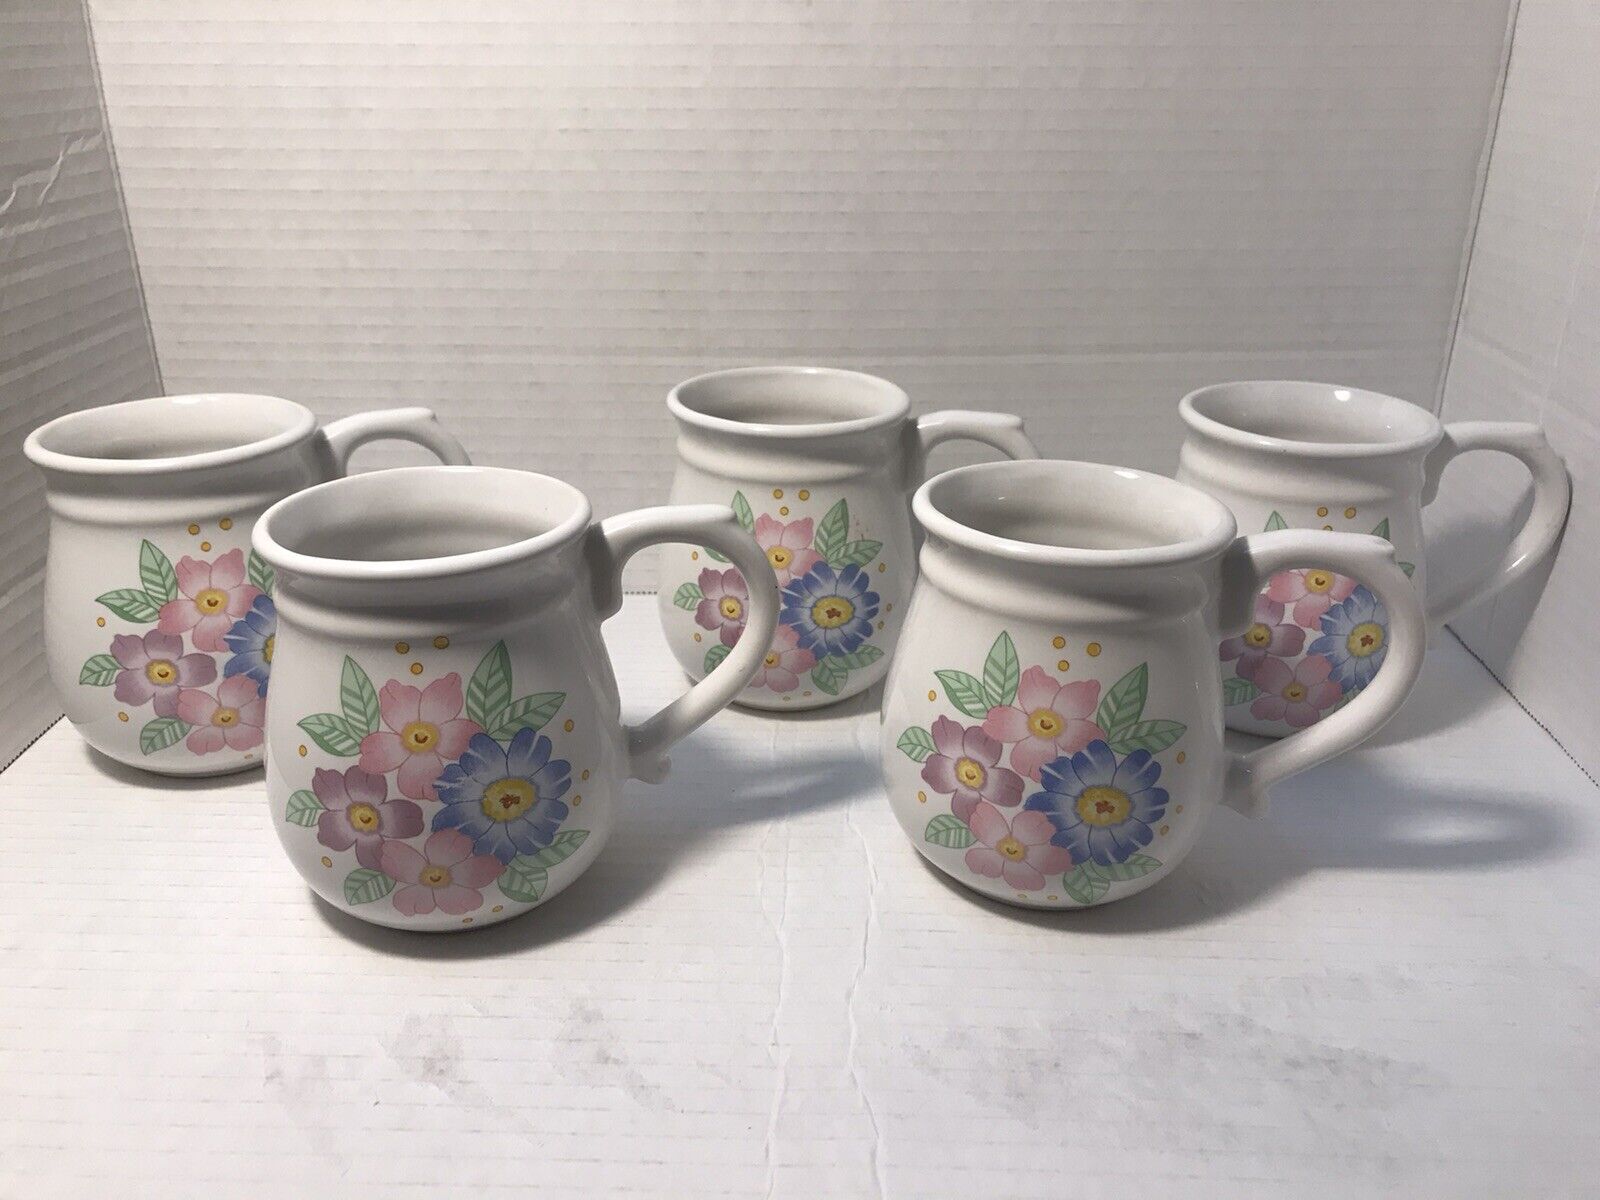 Cup Mug Vintage 1988-SJL Products - Made In Taiwan Set 5